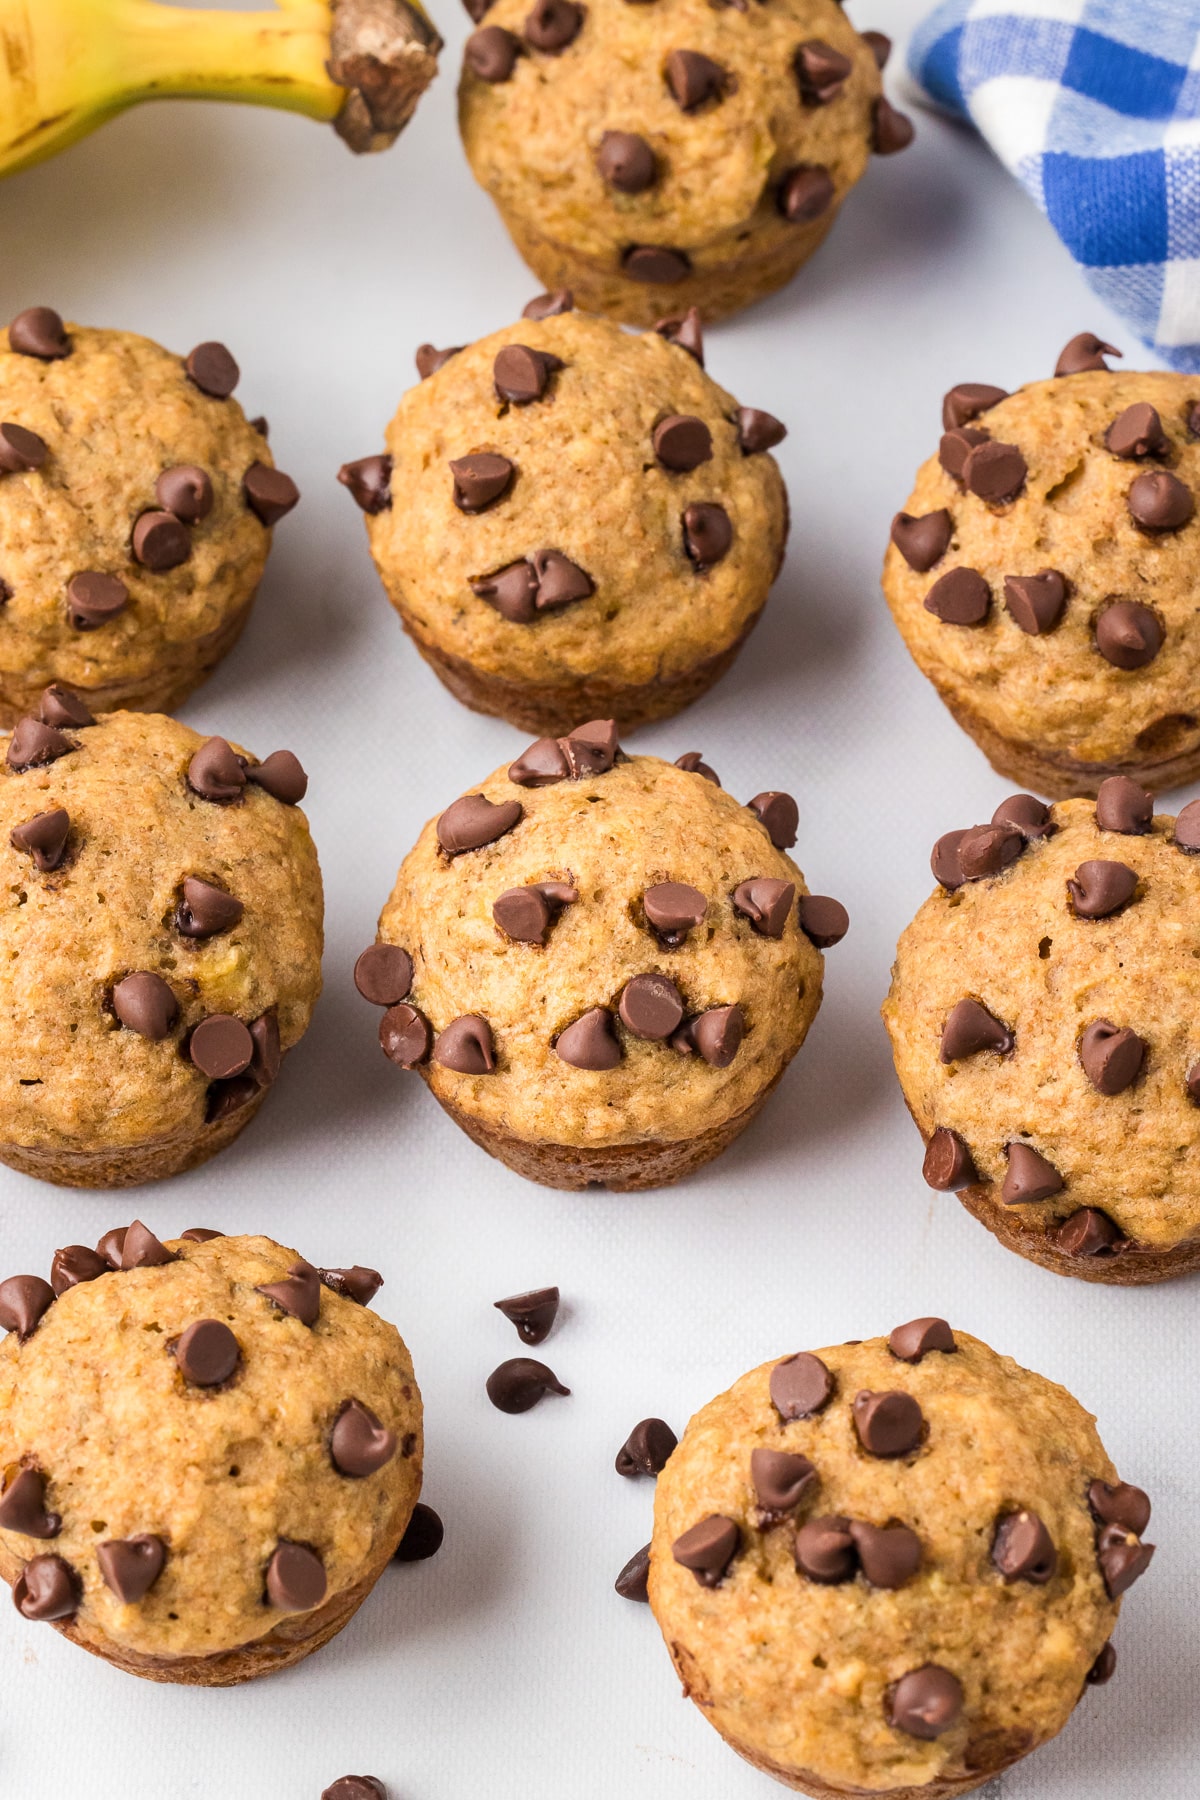 Freshly baked mini banana chocolate chip muffins on a counter from above.